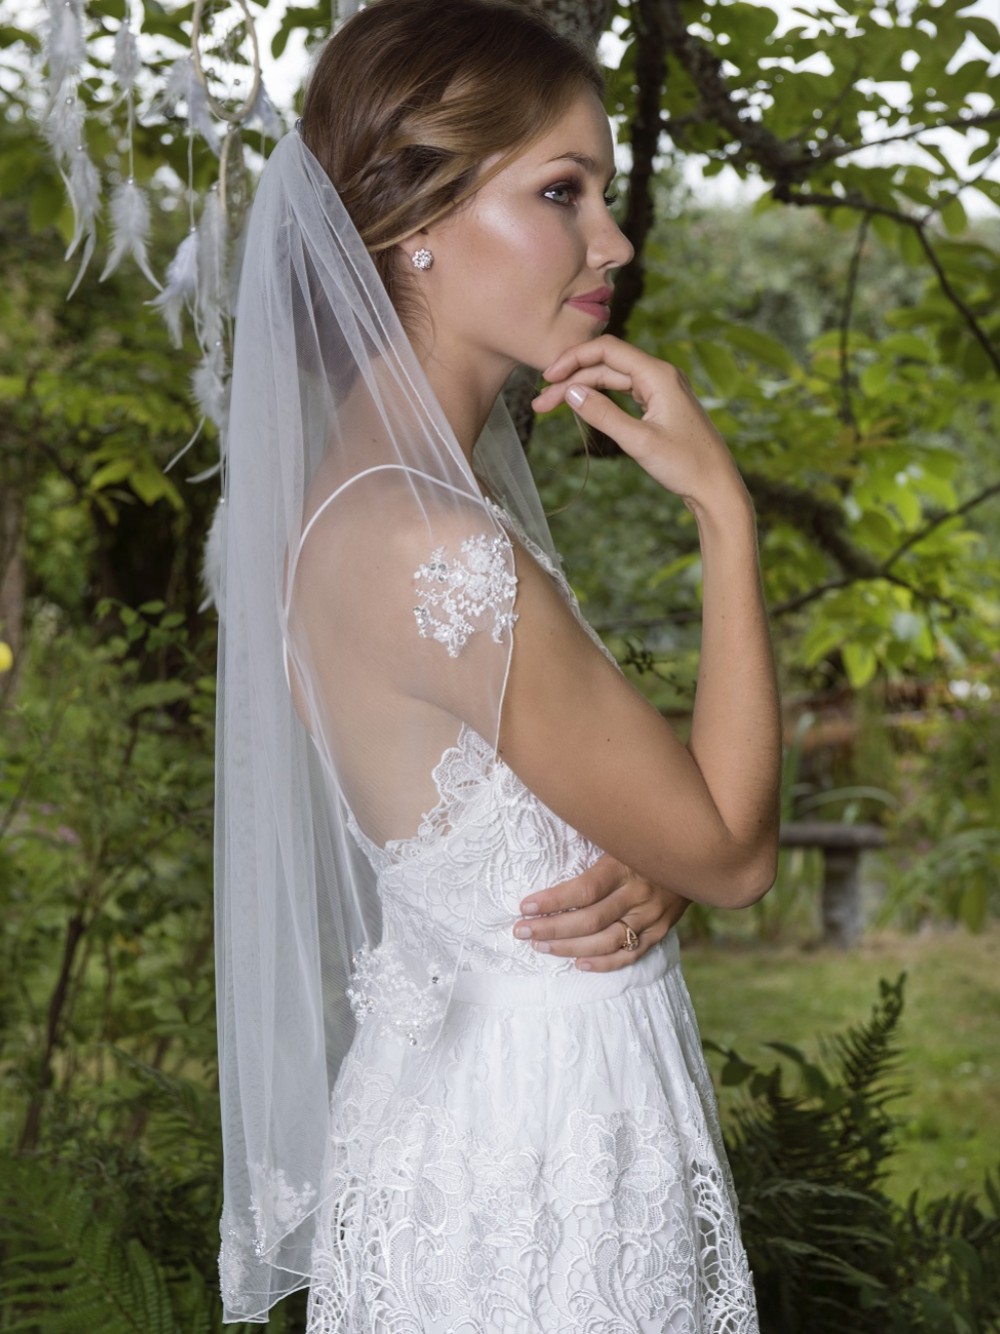 Photograph of Joyce Jackson Cosmos Single Tier Veil with Scattered Lace Motifs